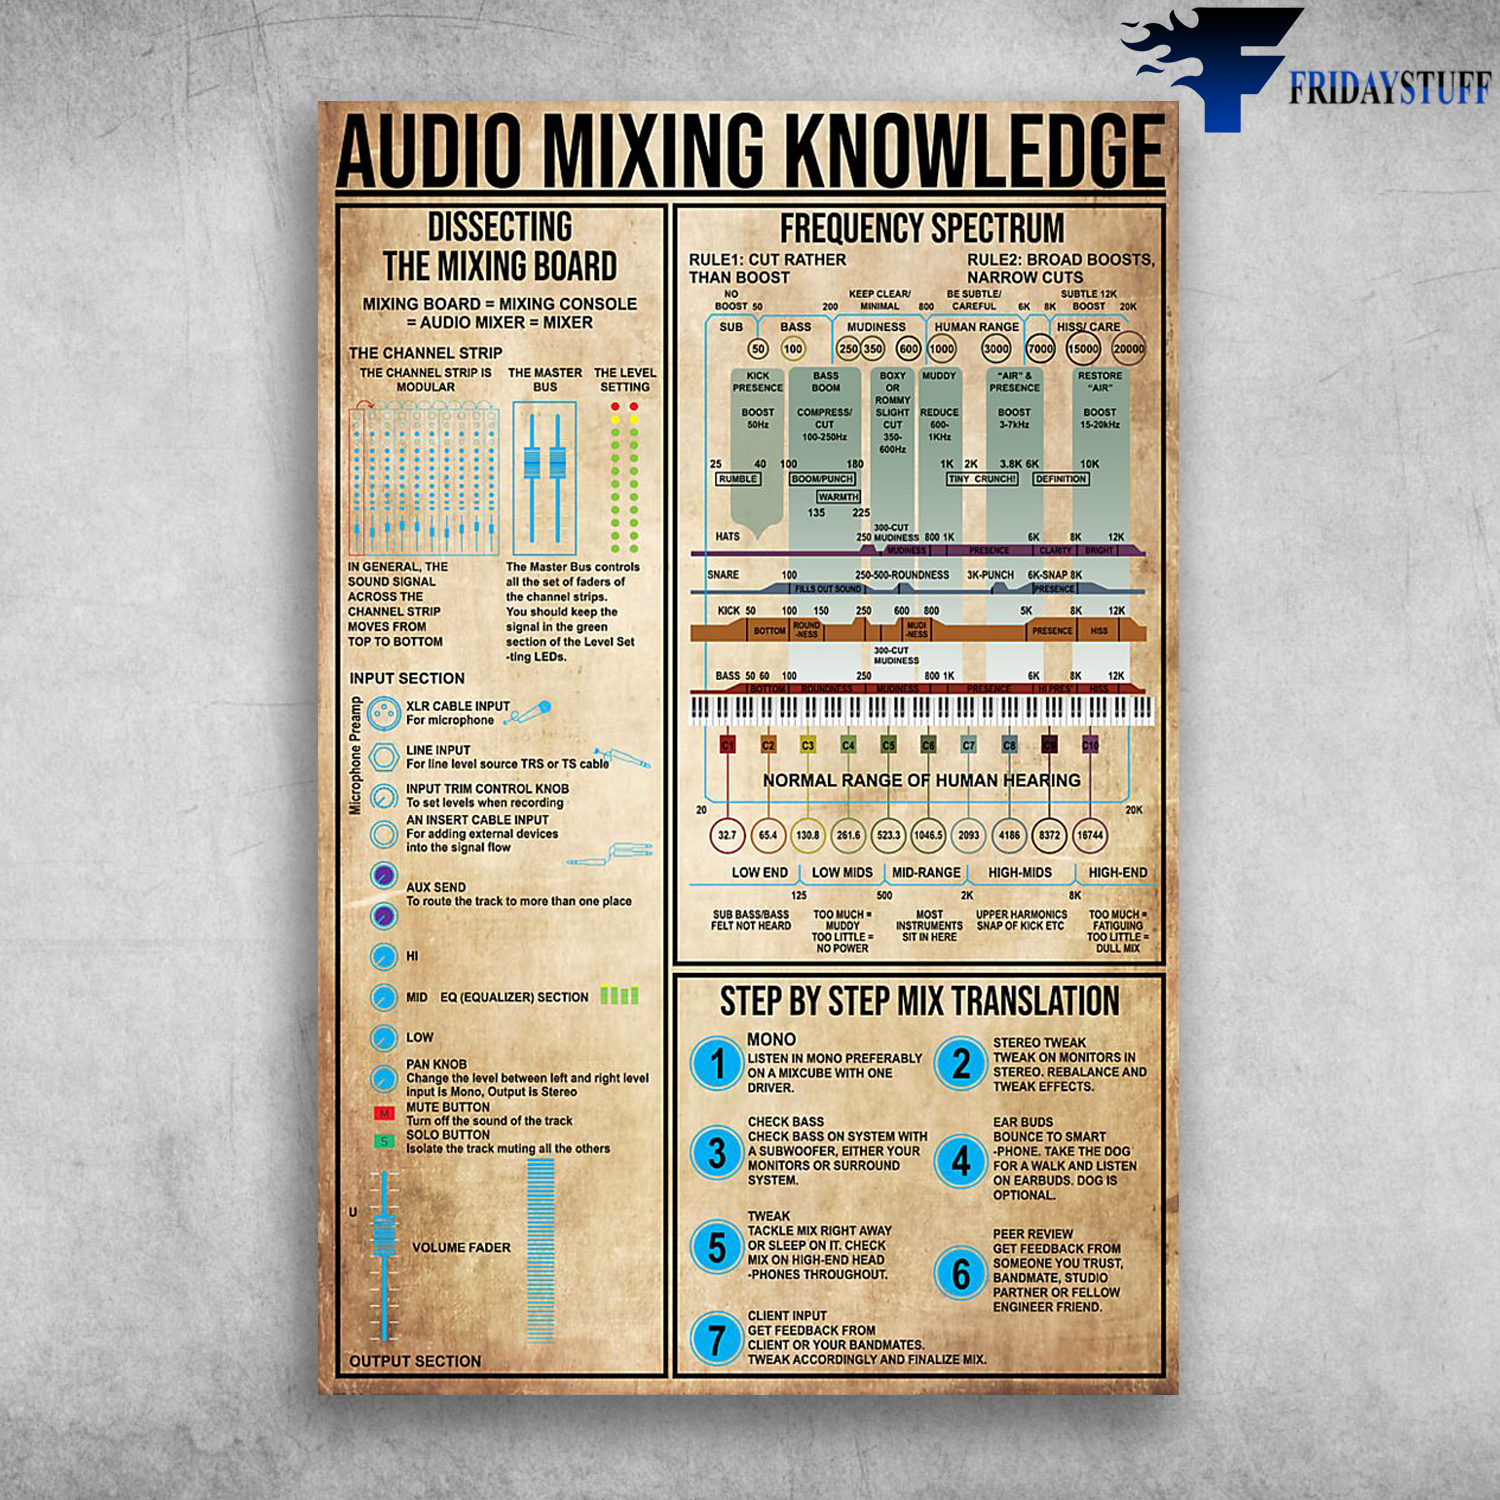 Audio Mixing Knowledge Dissecting The Mixing Board Frequency Spectrum